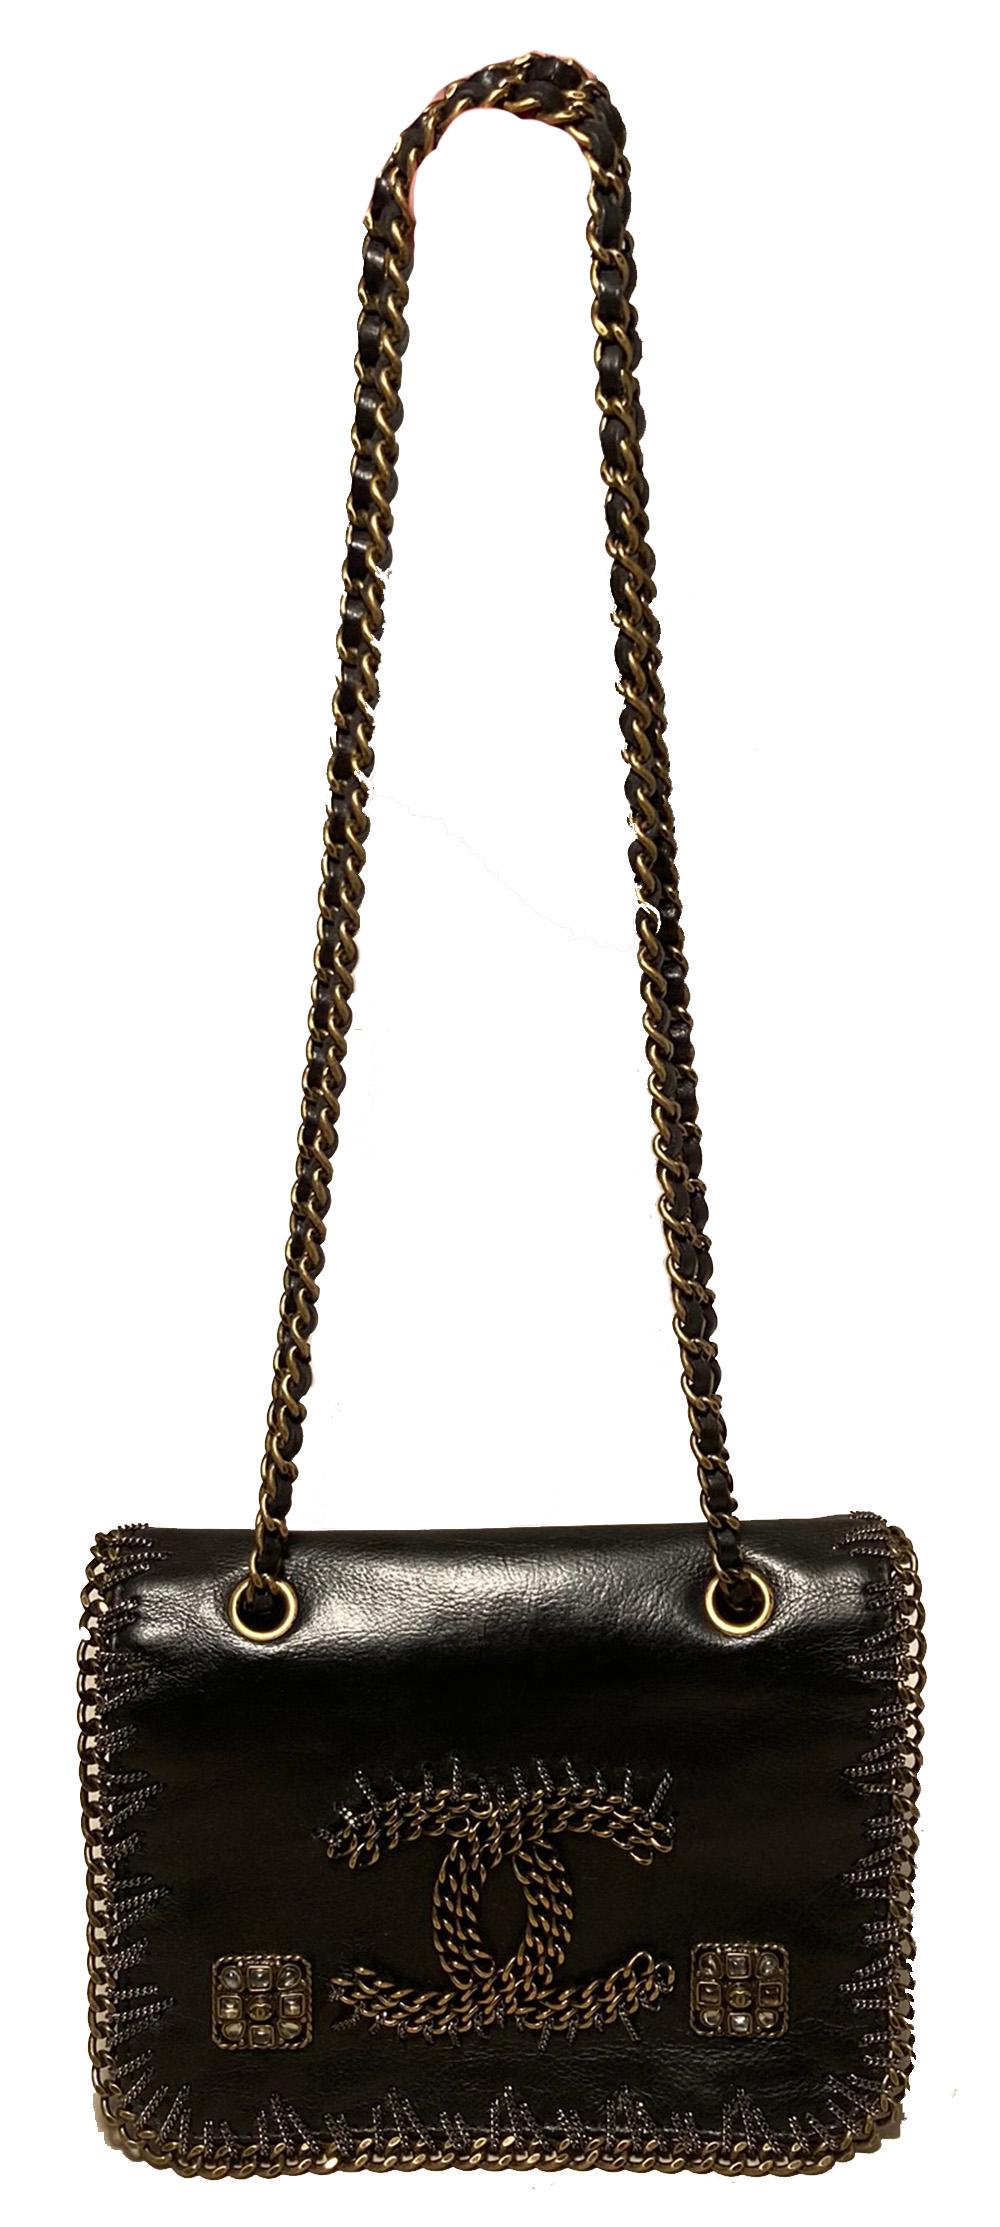 RARE Chanel Gripoix Beaded Black Leather Chain Trim Classic Flap Bag in excellent condition. Black leather exterior antiqued bronze and silver chain trim and CC logo with beautiful gripoix glass beaded square details along top flap. Magnetic snap